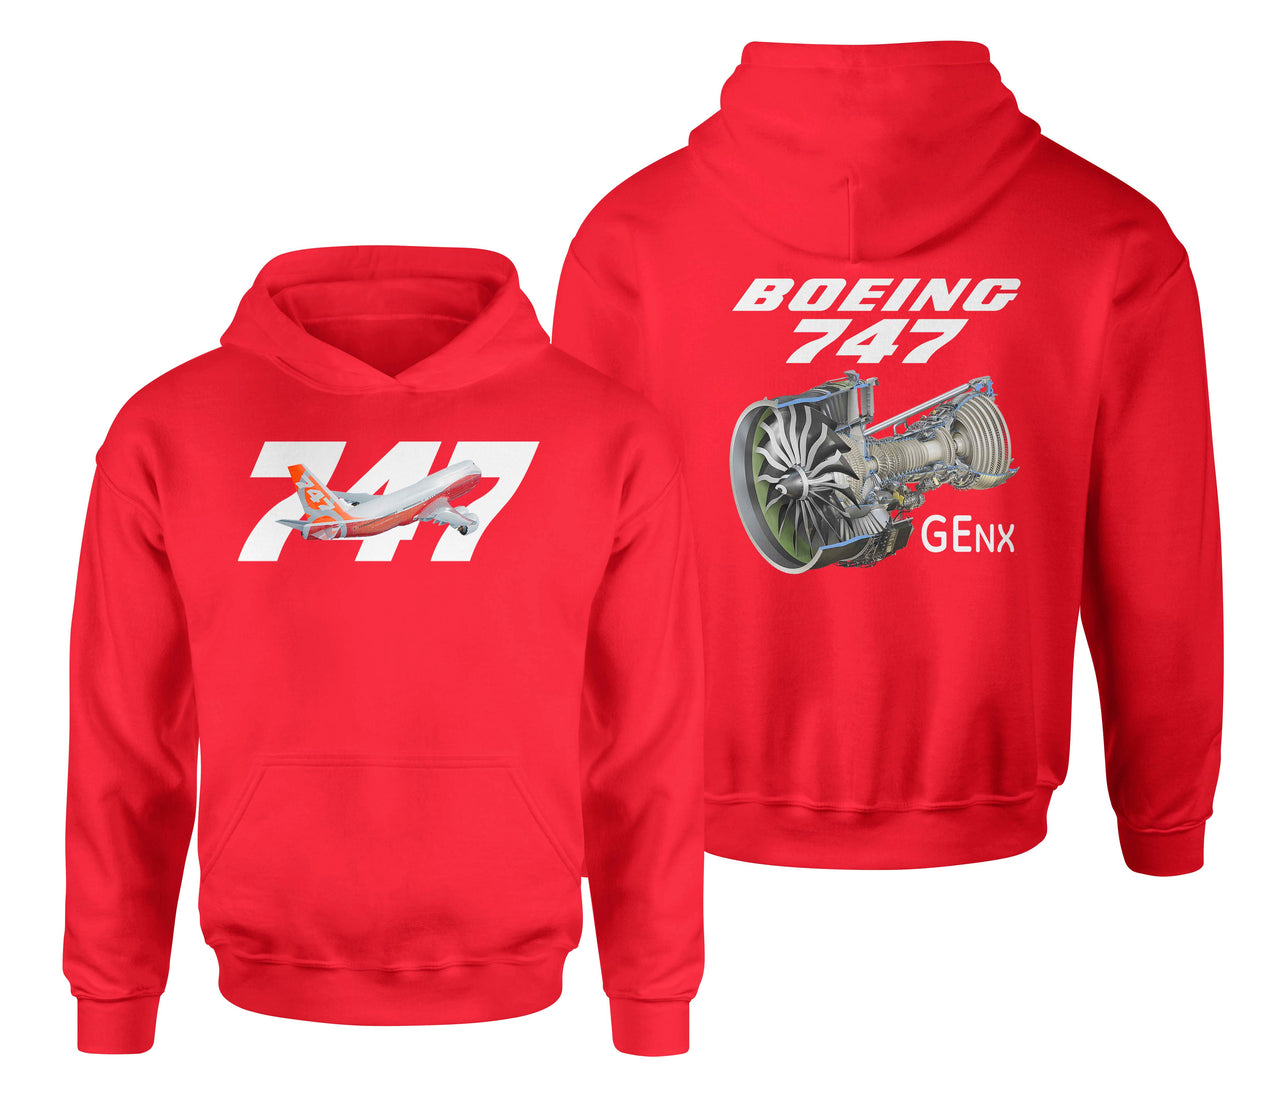 Boeing 747 & GENX Engine Designed Double Side Hoodies